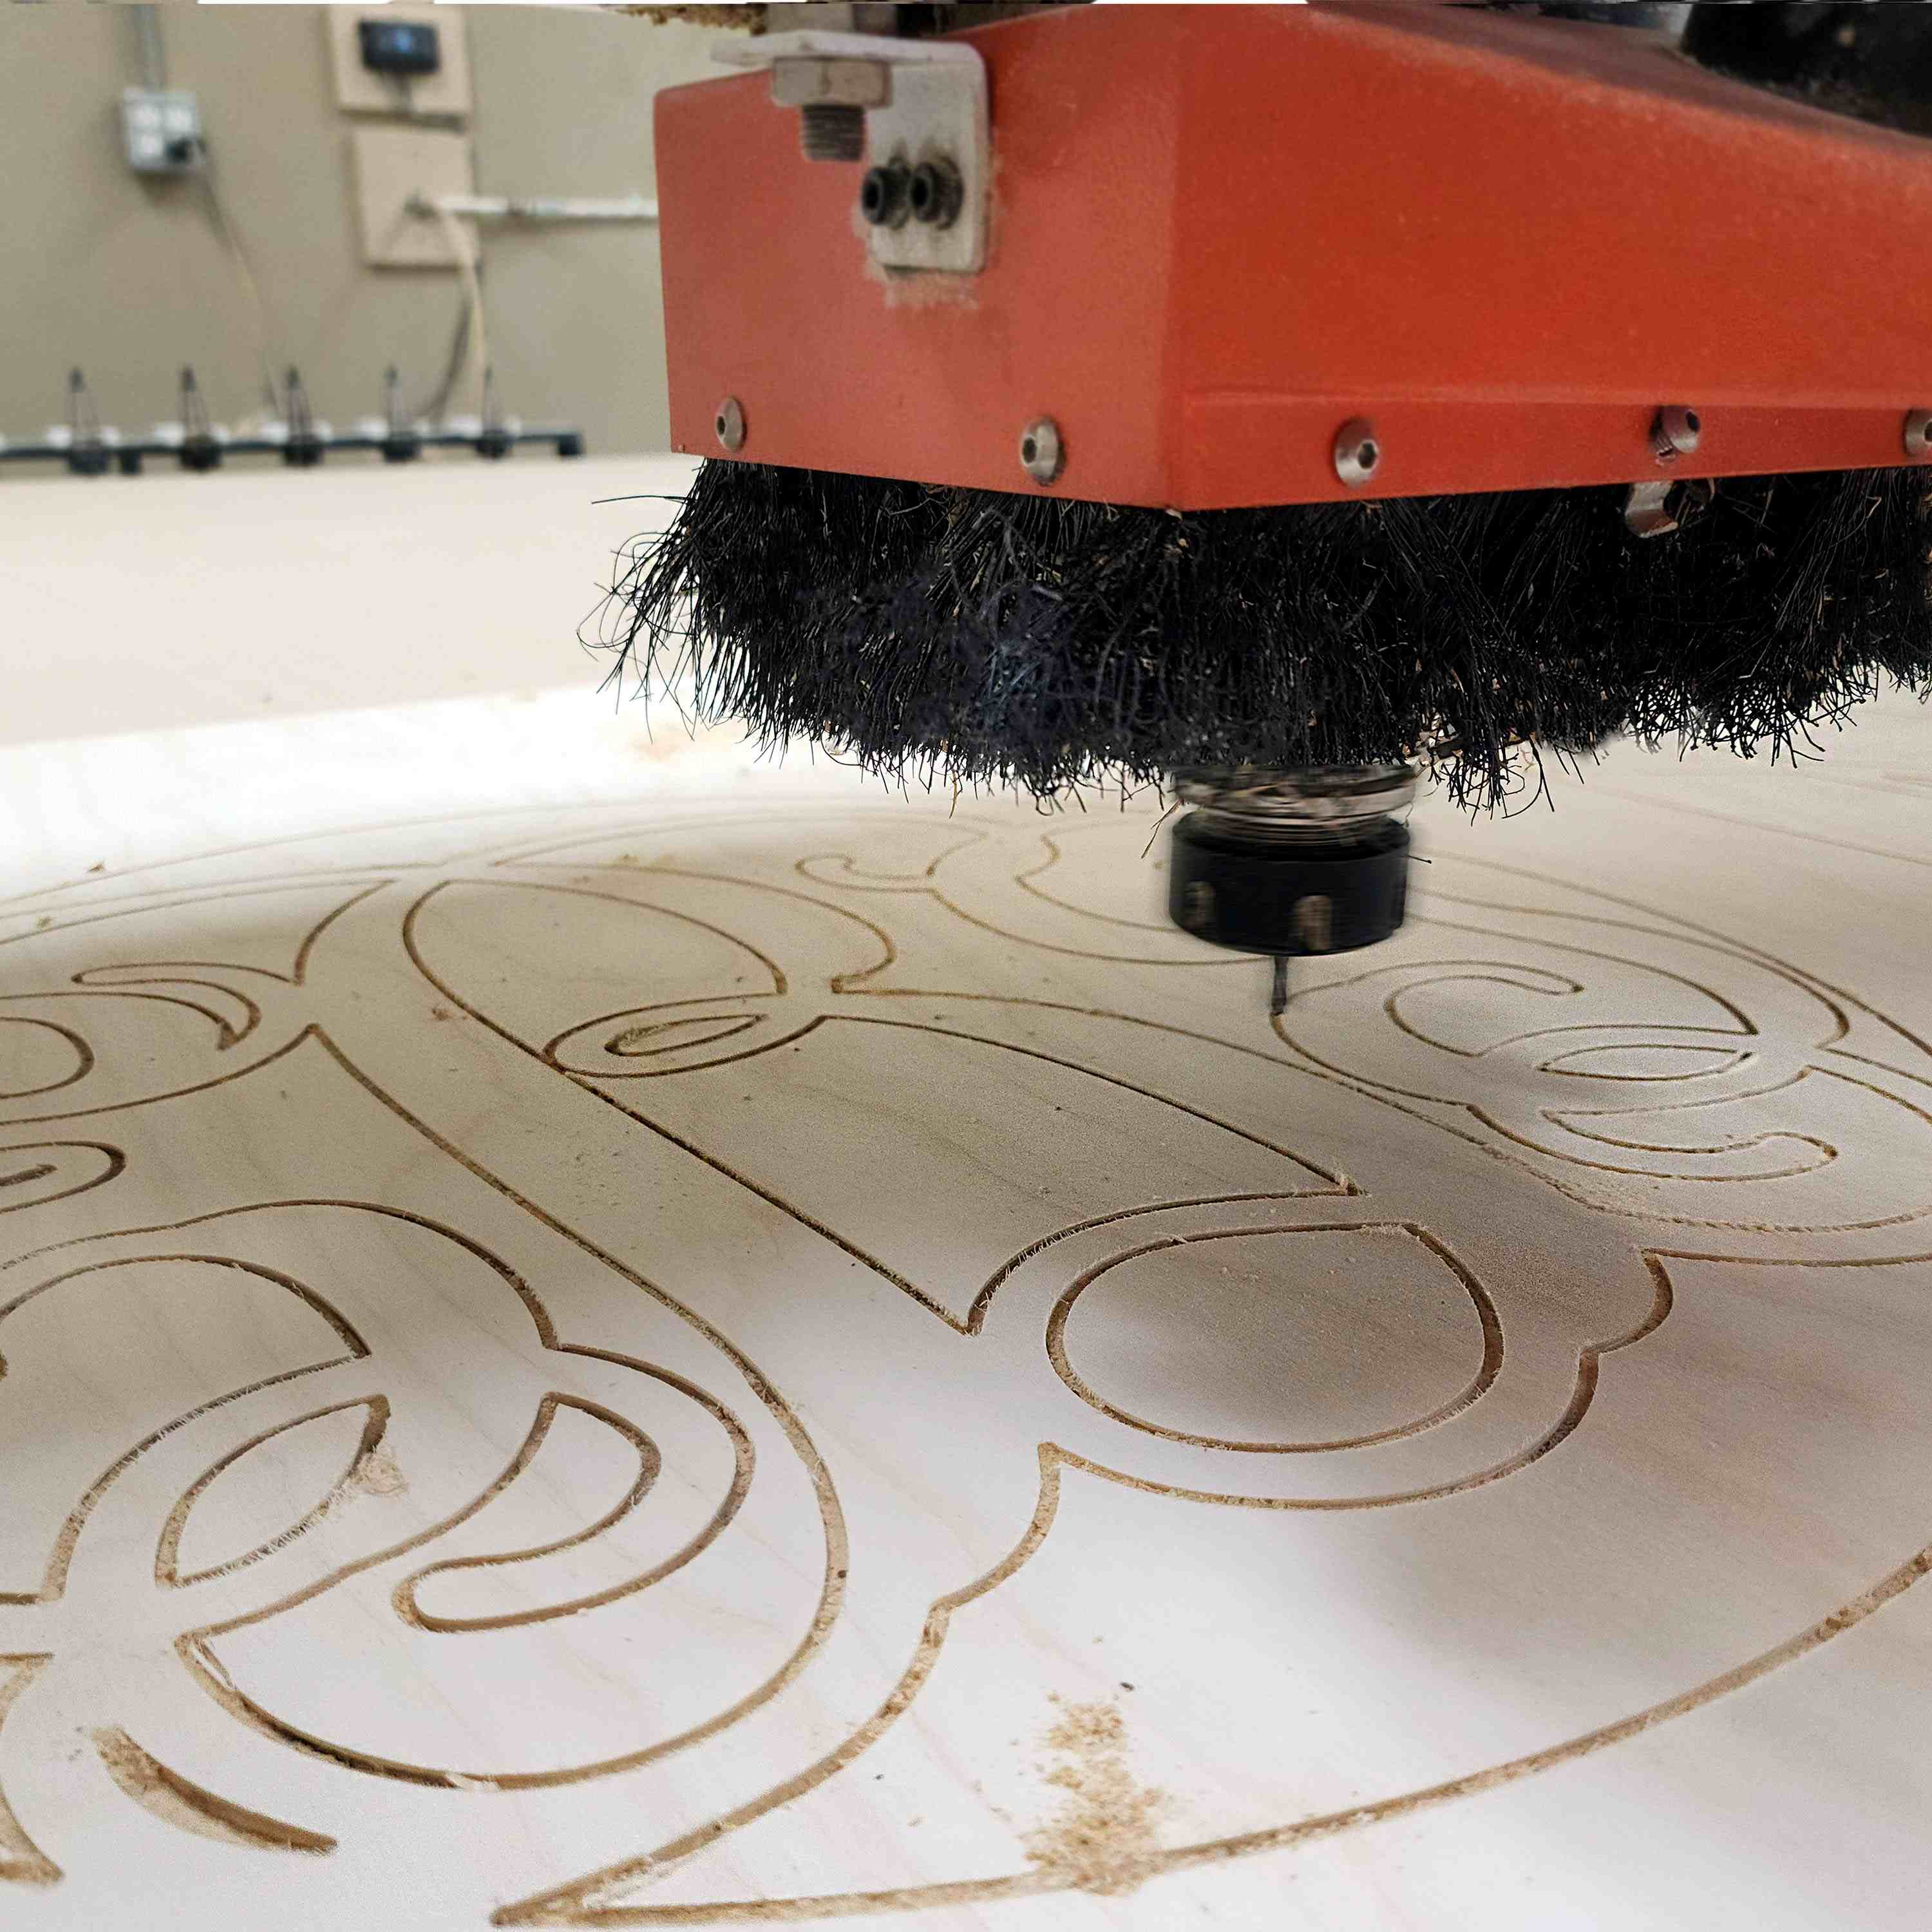 CNC machine cutting a large monogram sign out of wood.